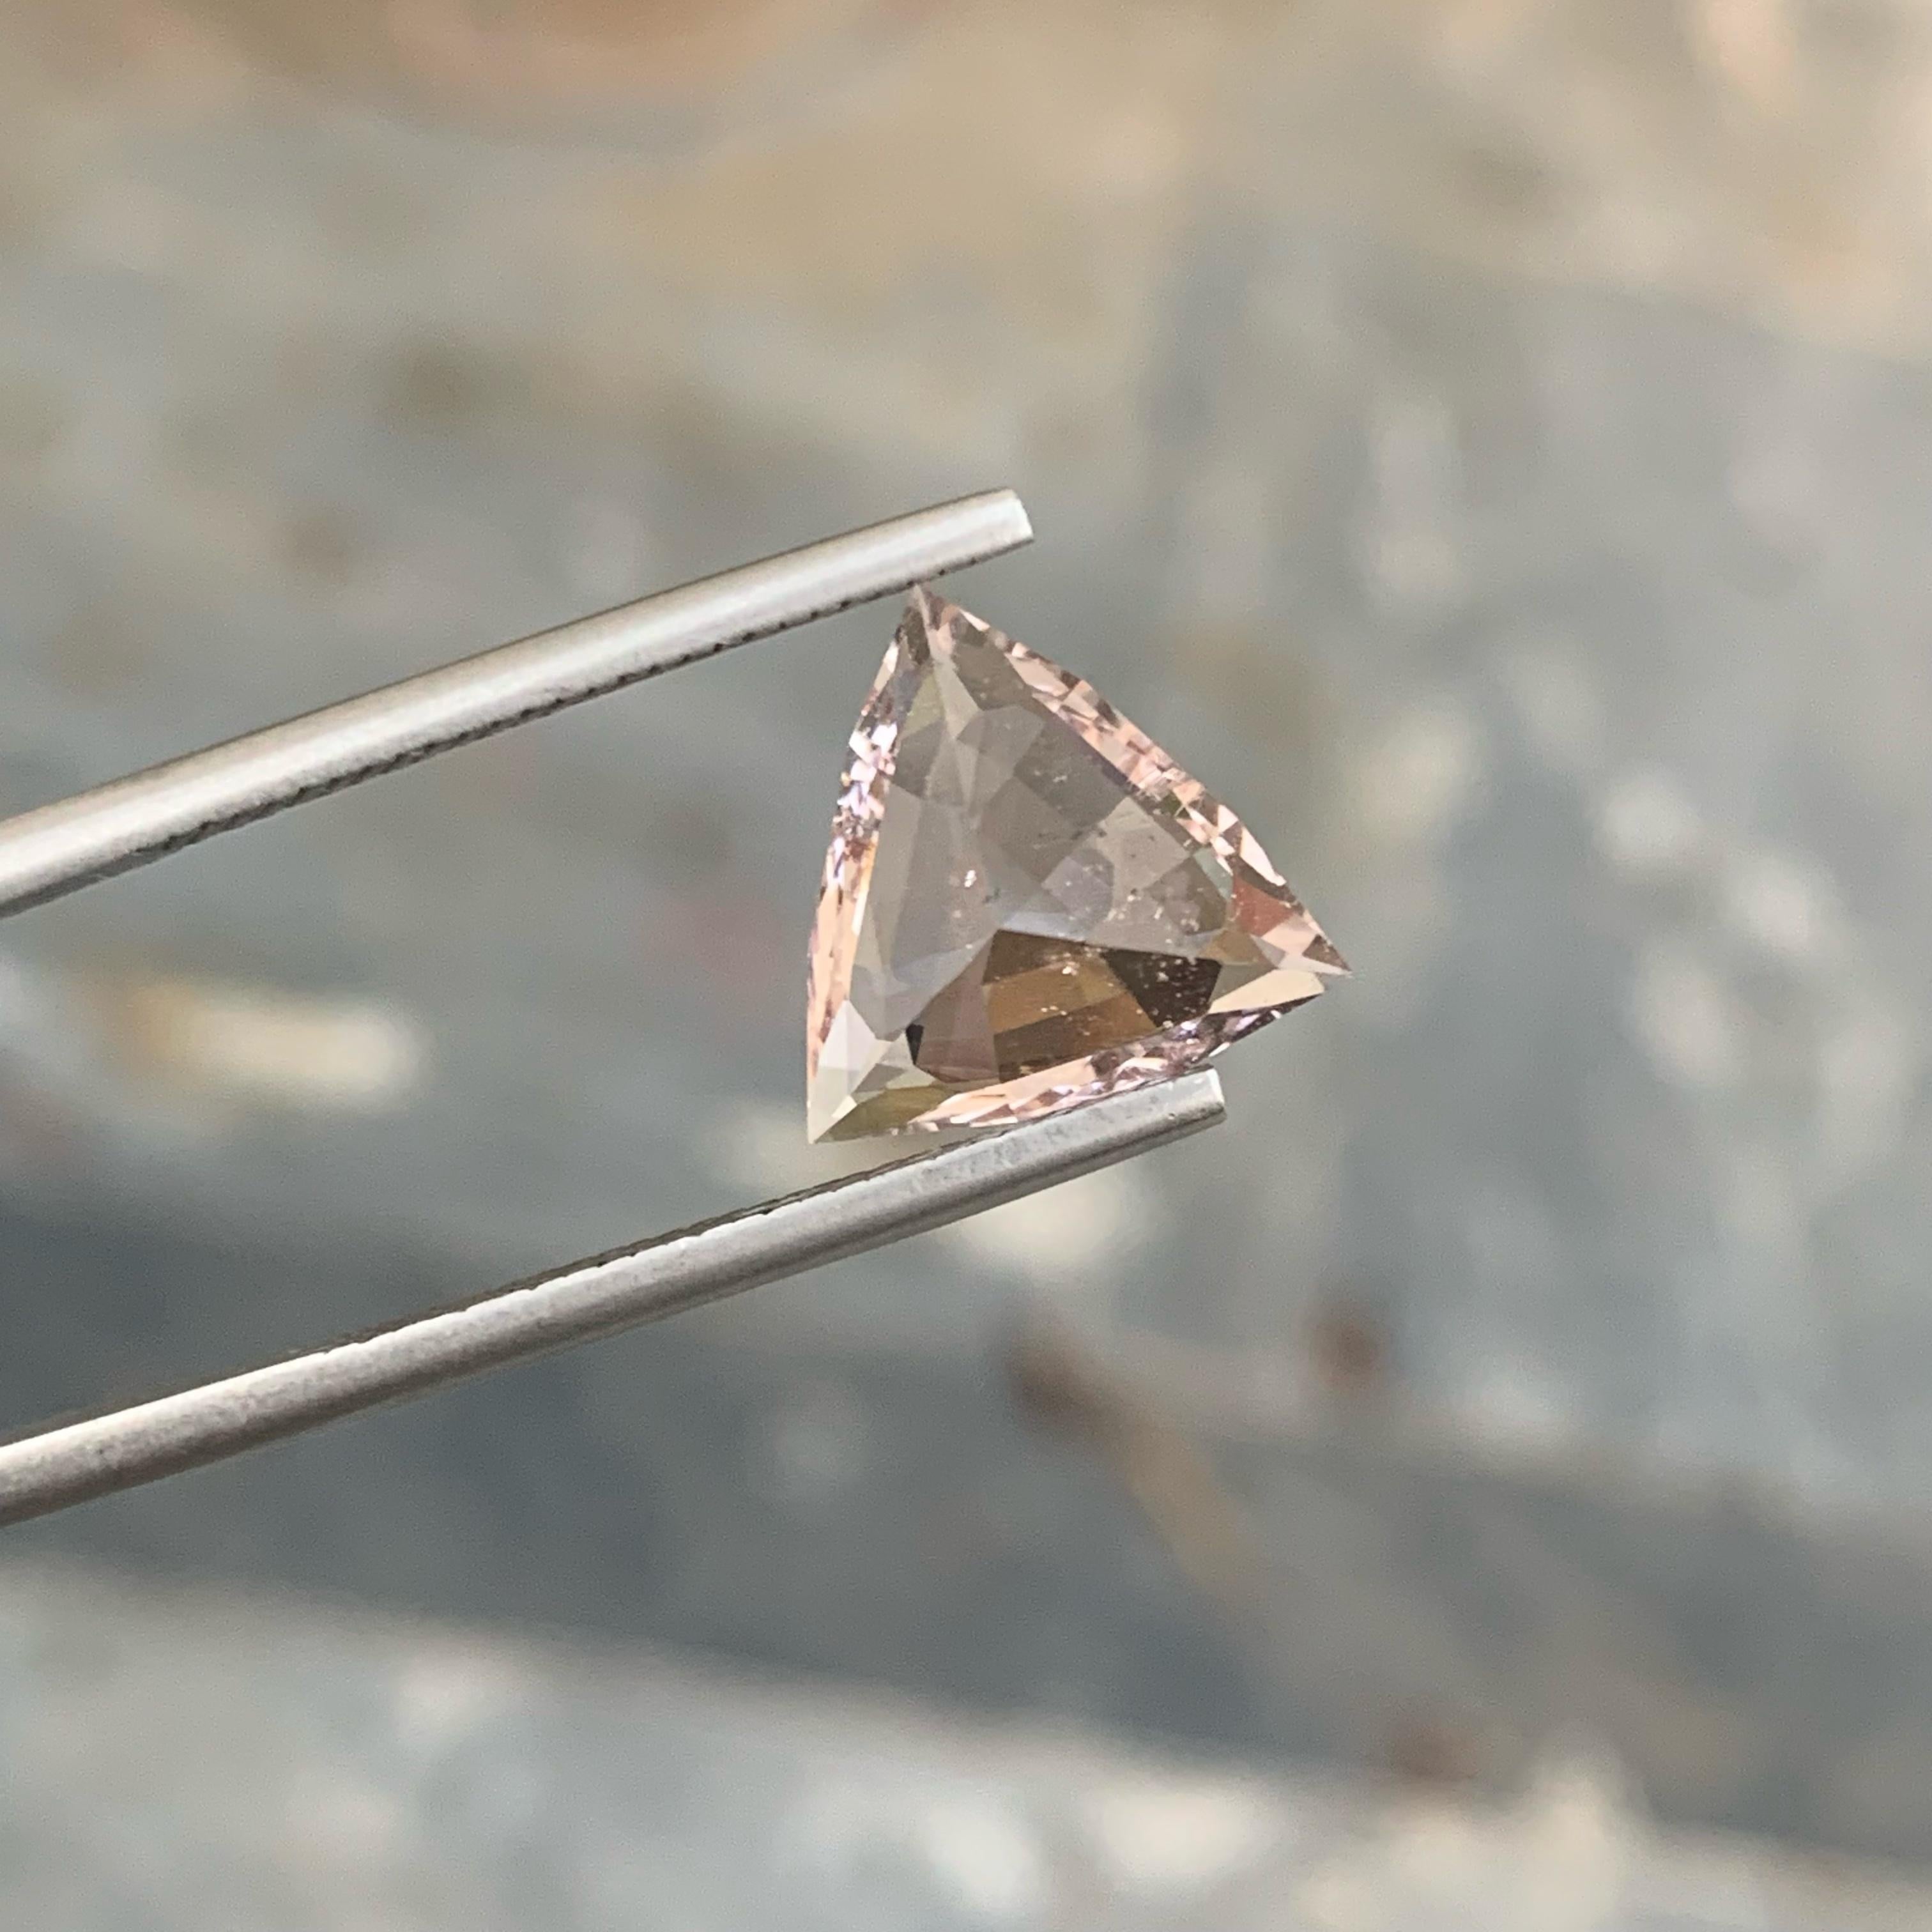 Weight 4.30 carats 
Dimensions 12.8 x 11.9 x 6.7 mm
Treatment None 
Origin Afghanistan 
Clarity VVS (Very, Very Slightly Included)
Shape Triangular 
Cut Trilliant 



Discover the captivating beauty of Pink Morganite with this exquisite 4.30 carat